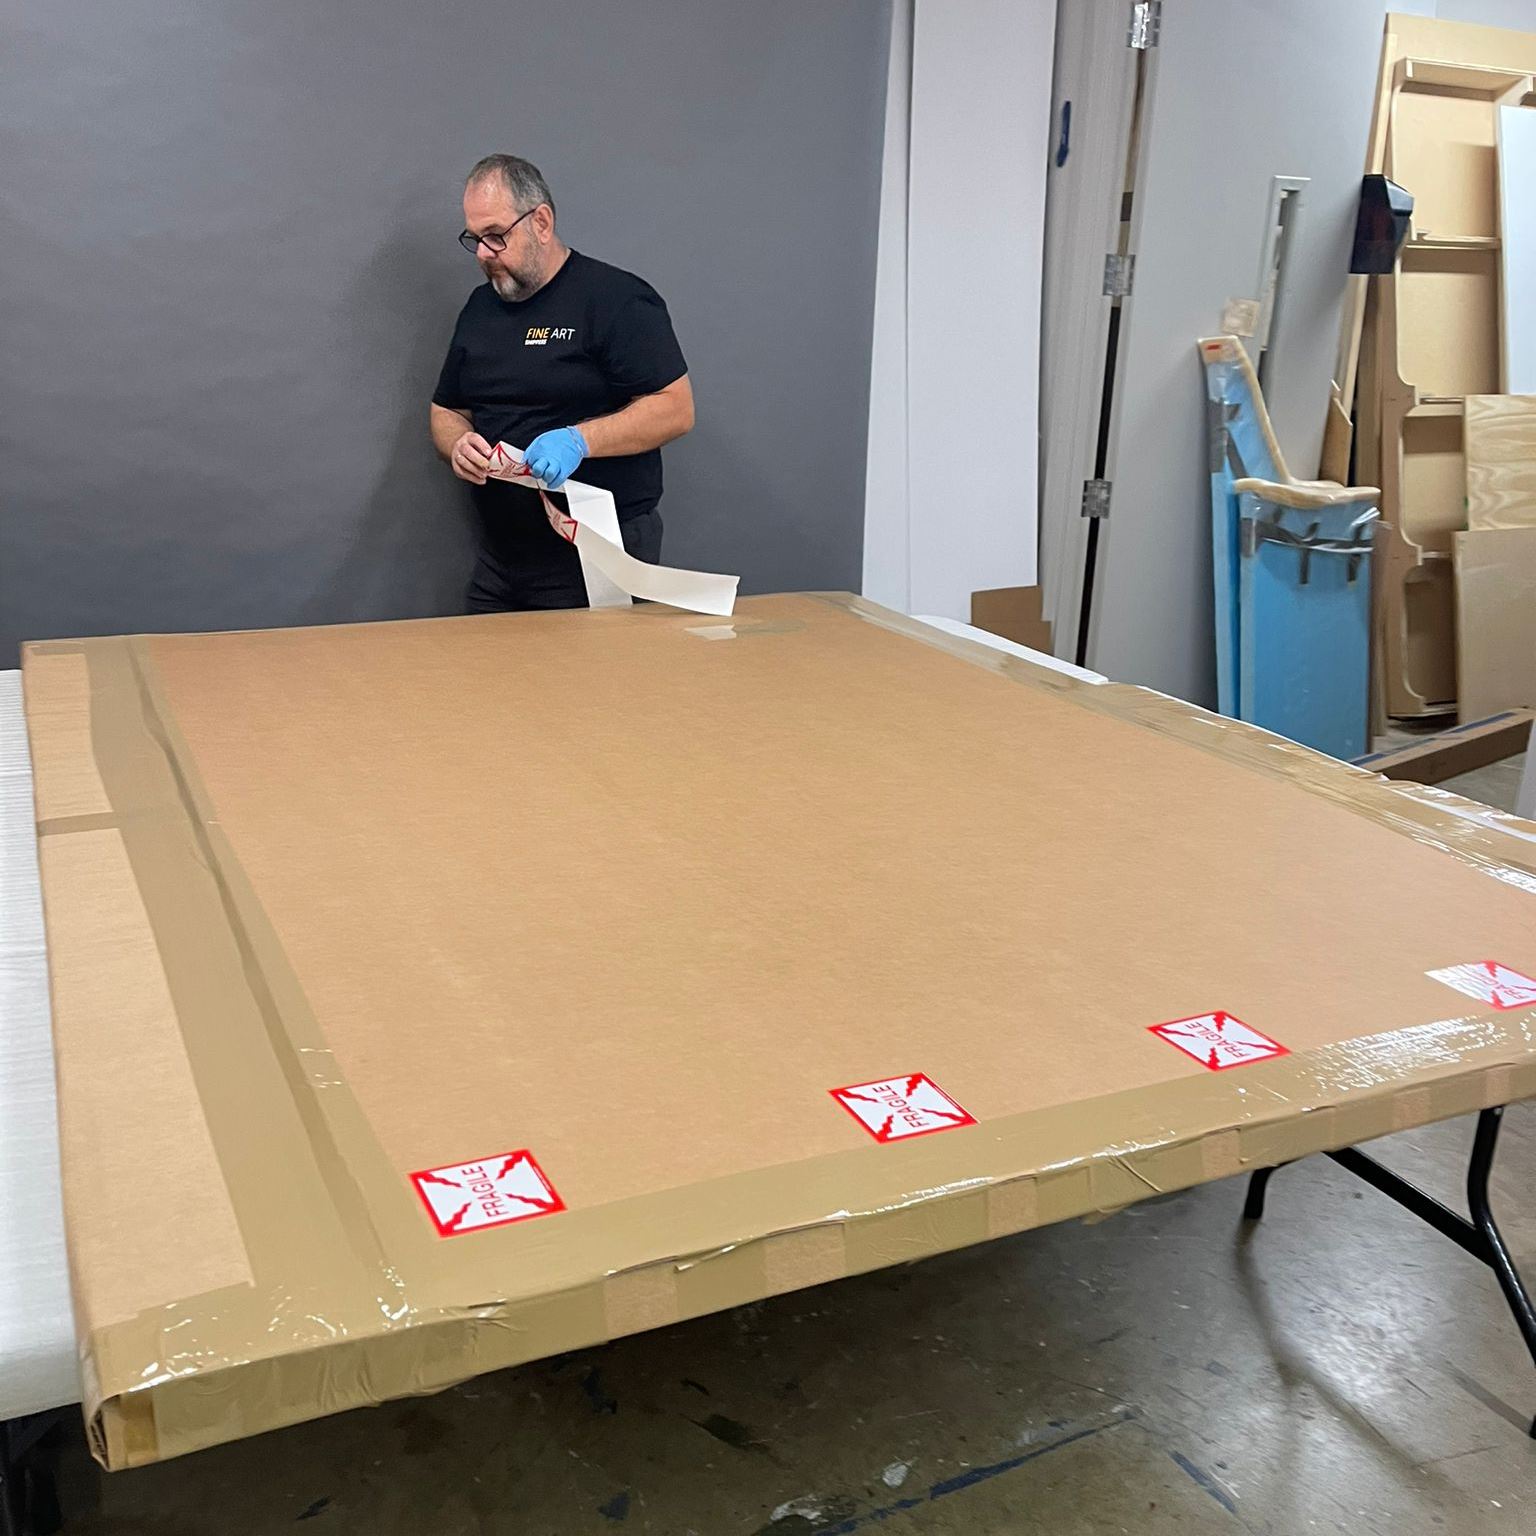 How to Ship Large Paintings